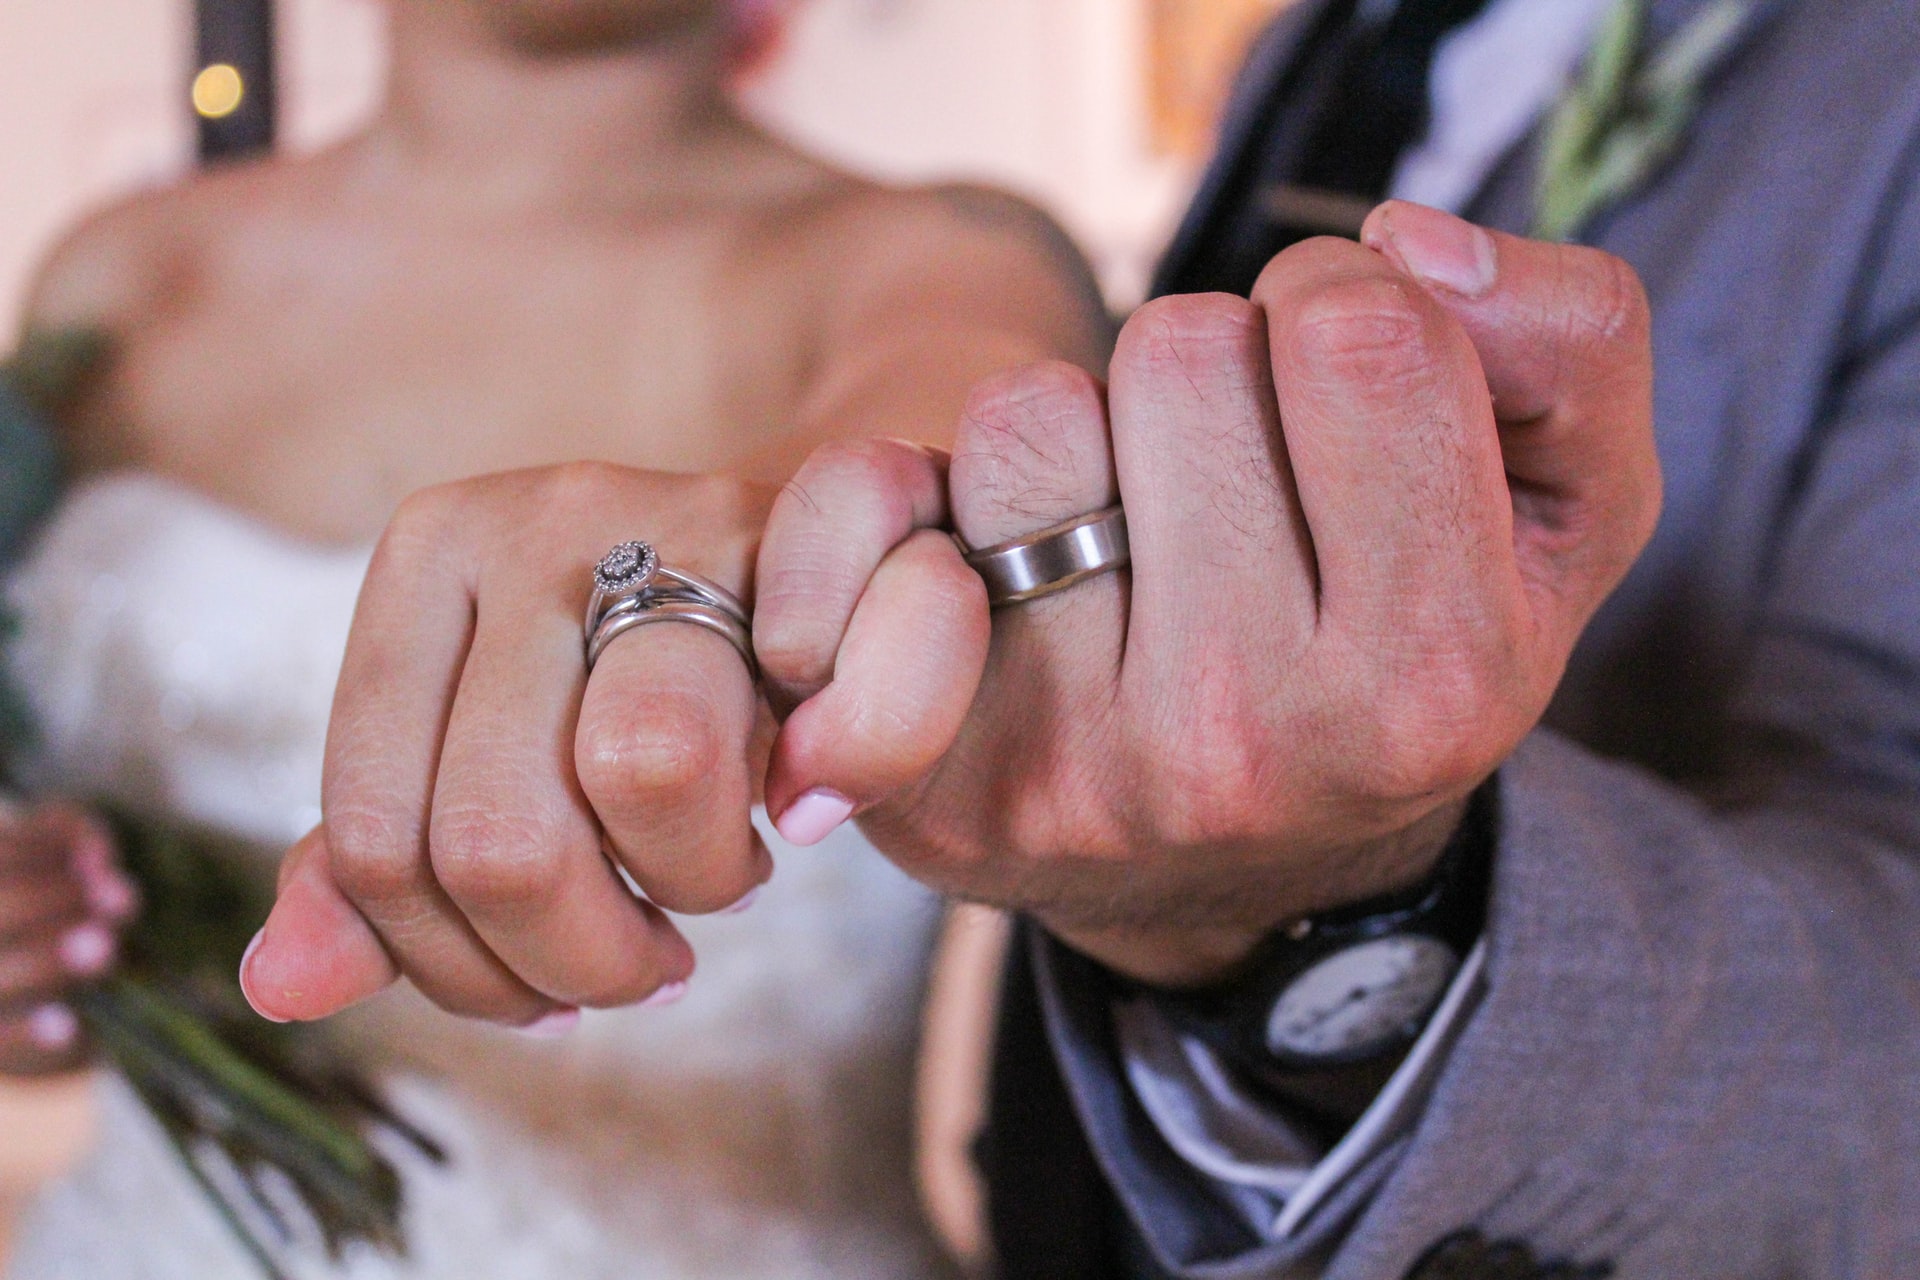 Close up of bride and groom making 'pinky promise' showing their wedding rings on fourth finger